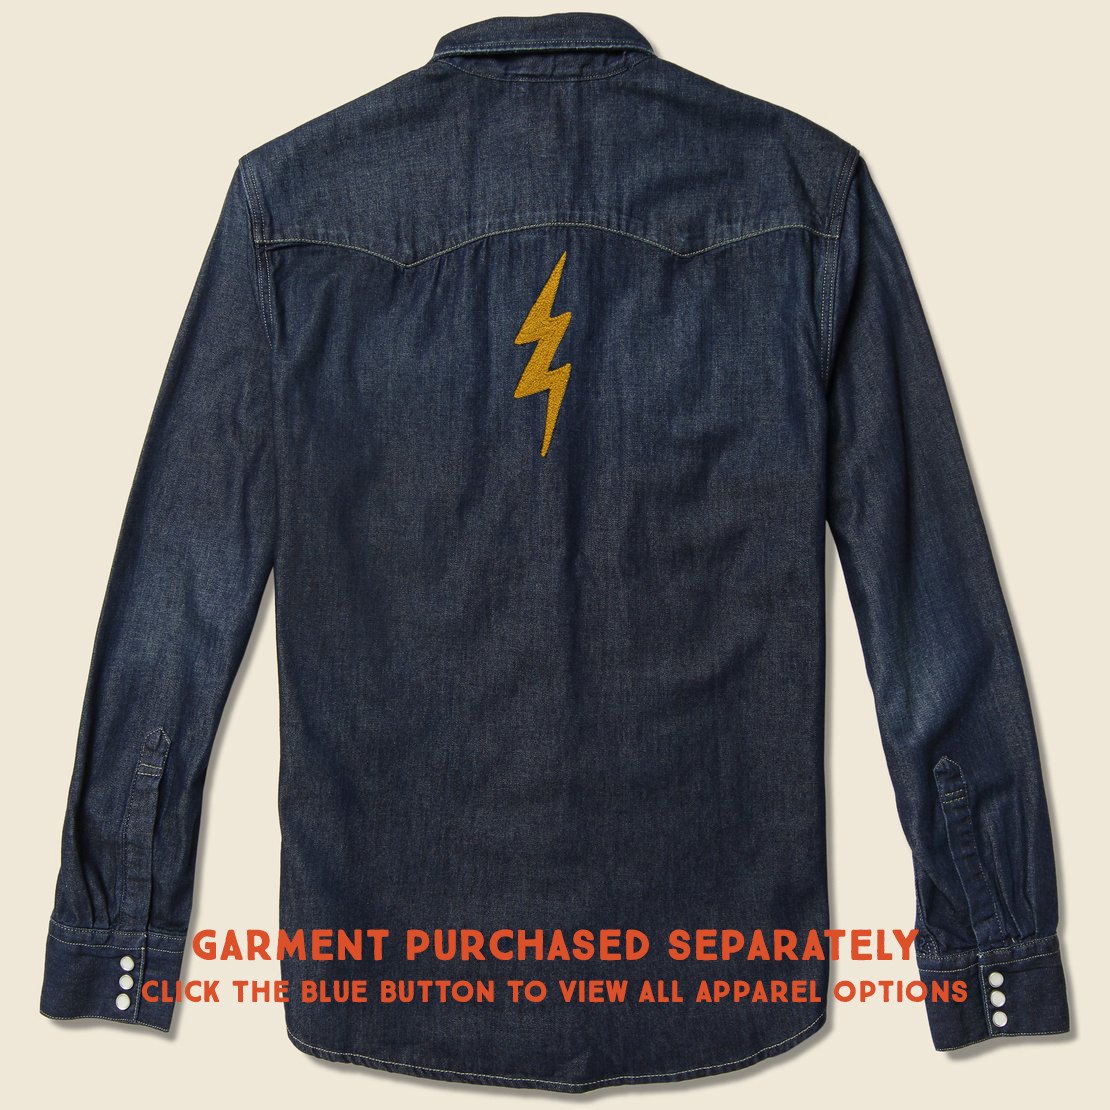 Small Direct Stitch Embroidery - Lightning Bolt - Fort Lonesome - STAG Provisions - Accessories - Patches